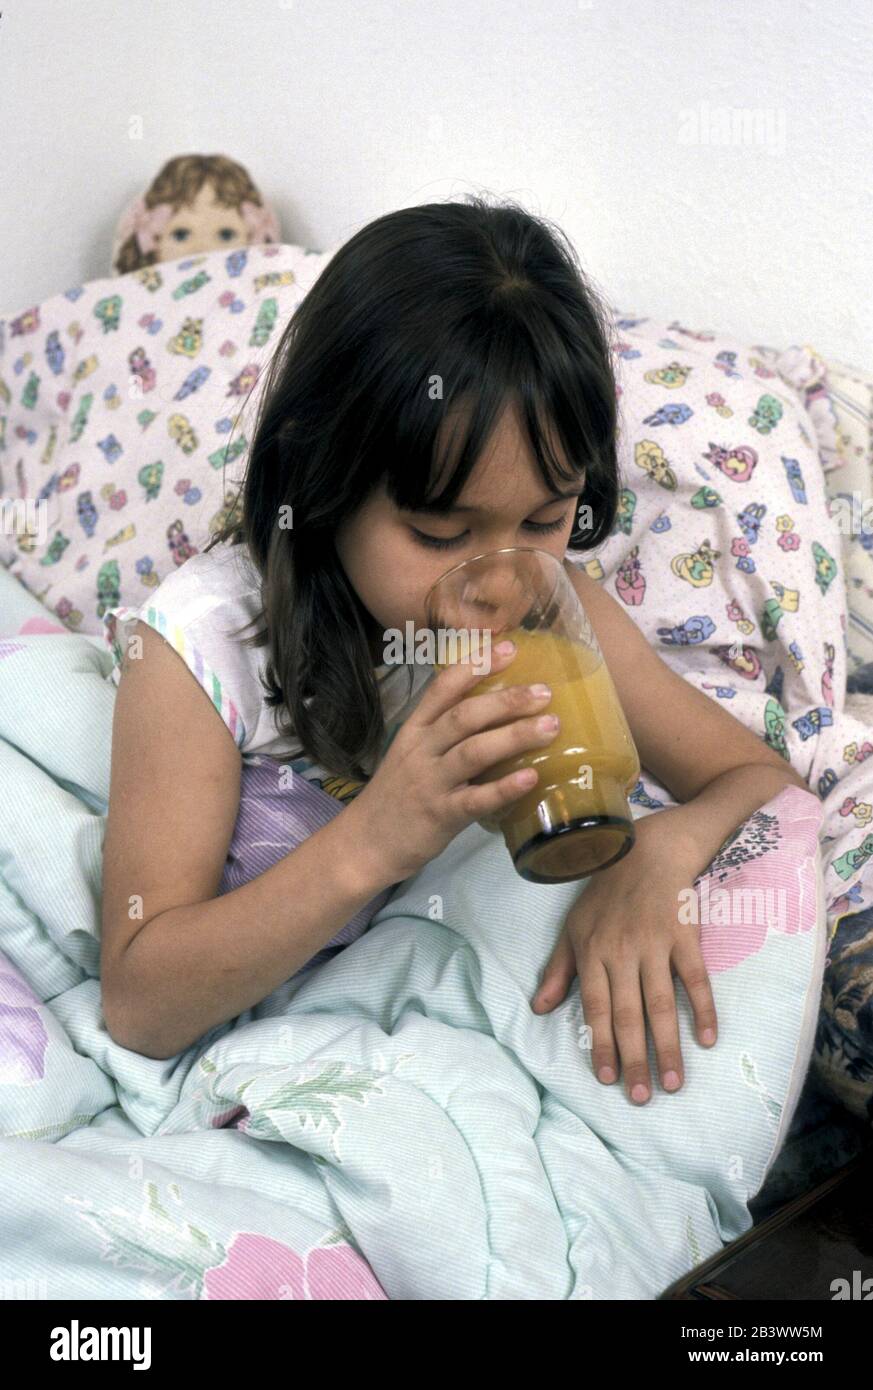 Austin, Texas USA: seven-year-old girl suffering from a mild cold drinking a glass of orange juice in bed before going to sleep. ©Bob Daemmrich Stock Photo